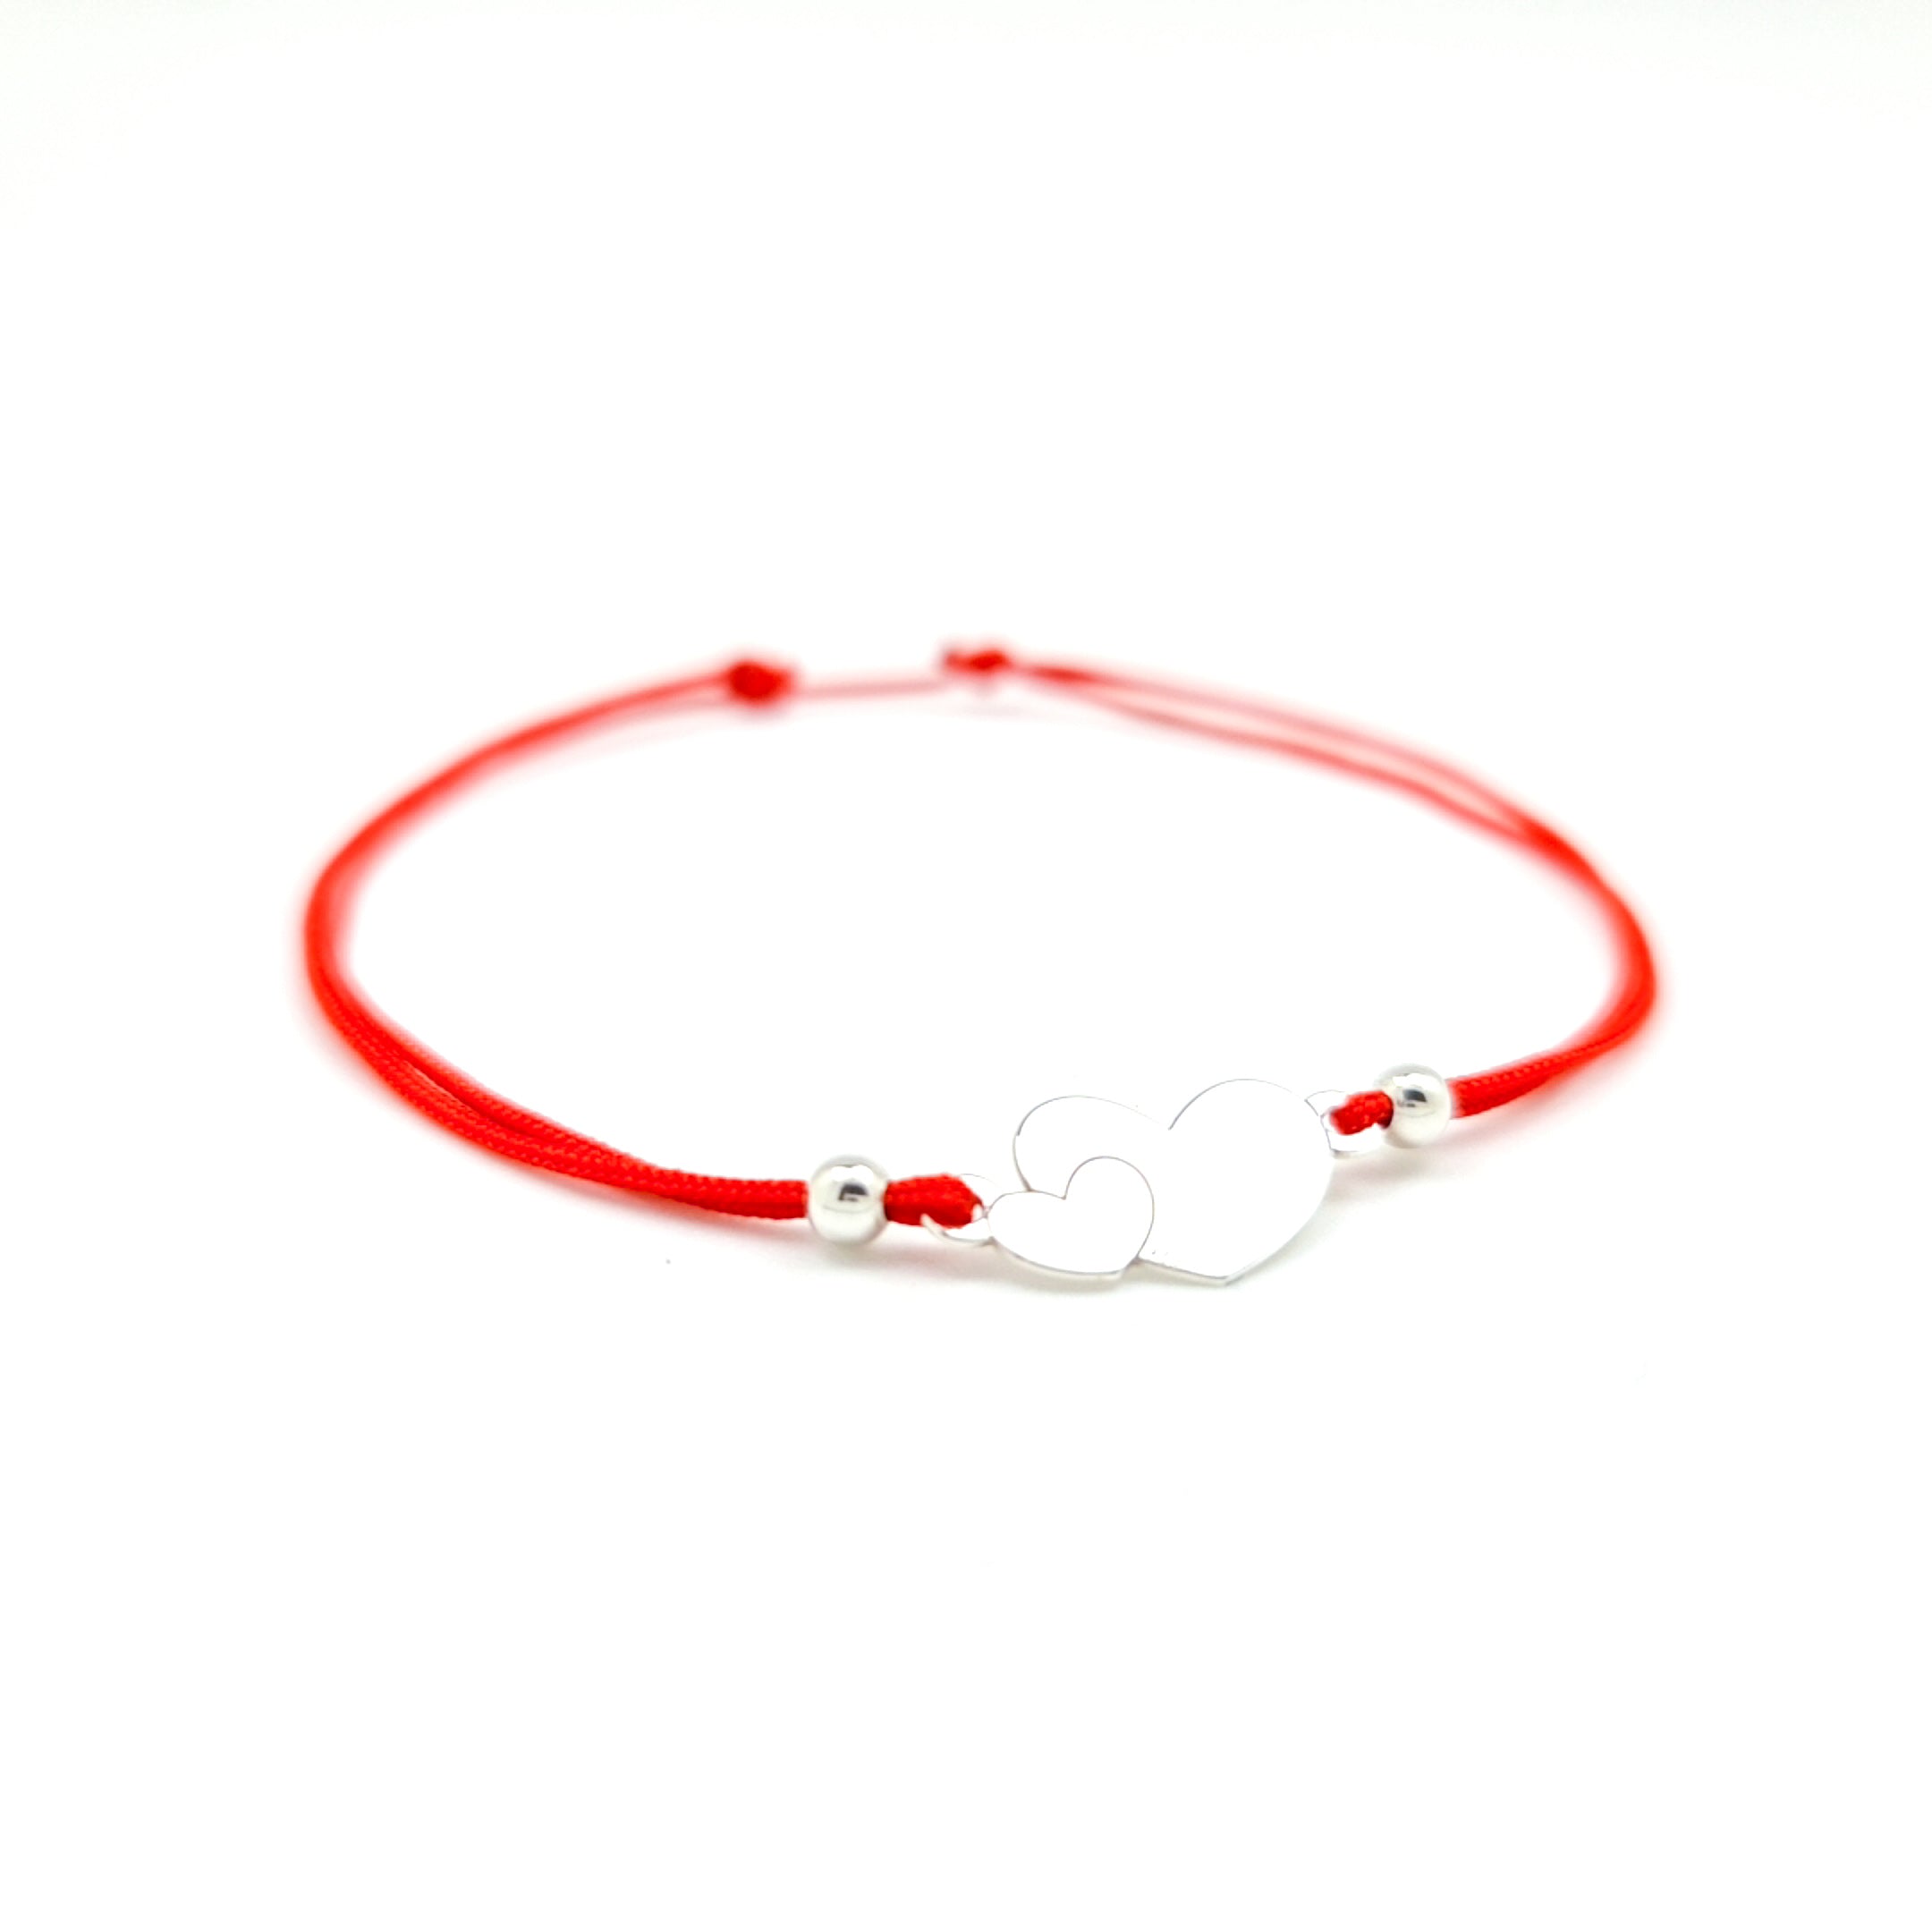 Silver Double Heart slip knot Red Cord Bracelet - Personalised Sterling Silver Jewellery Ireland. Birthstone necklace. Shop Local Ireland - Ireland